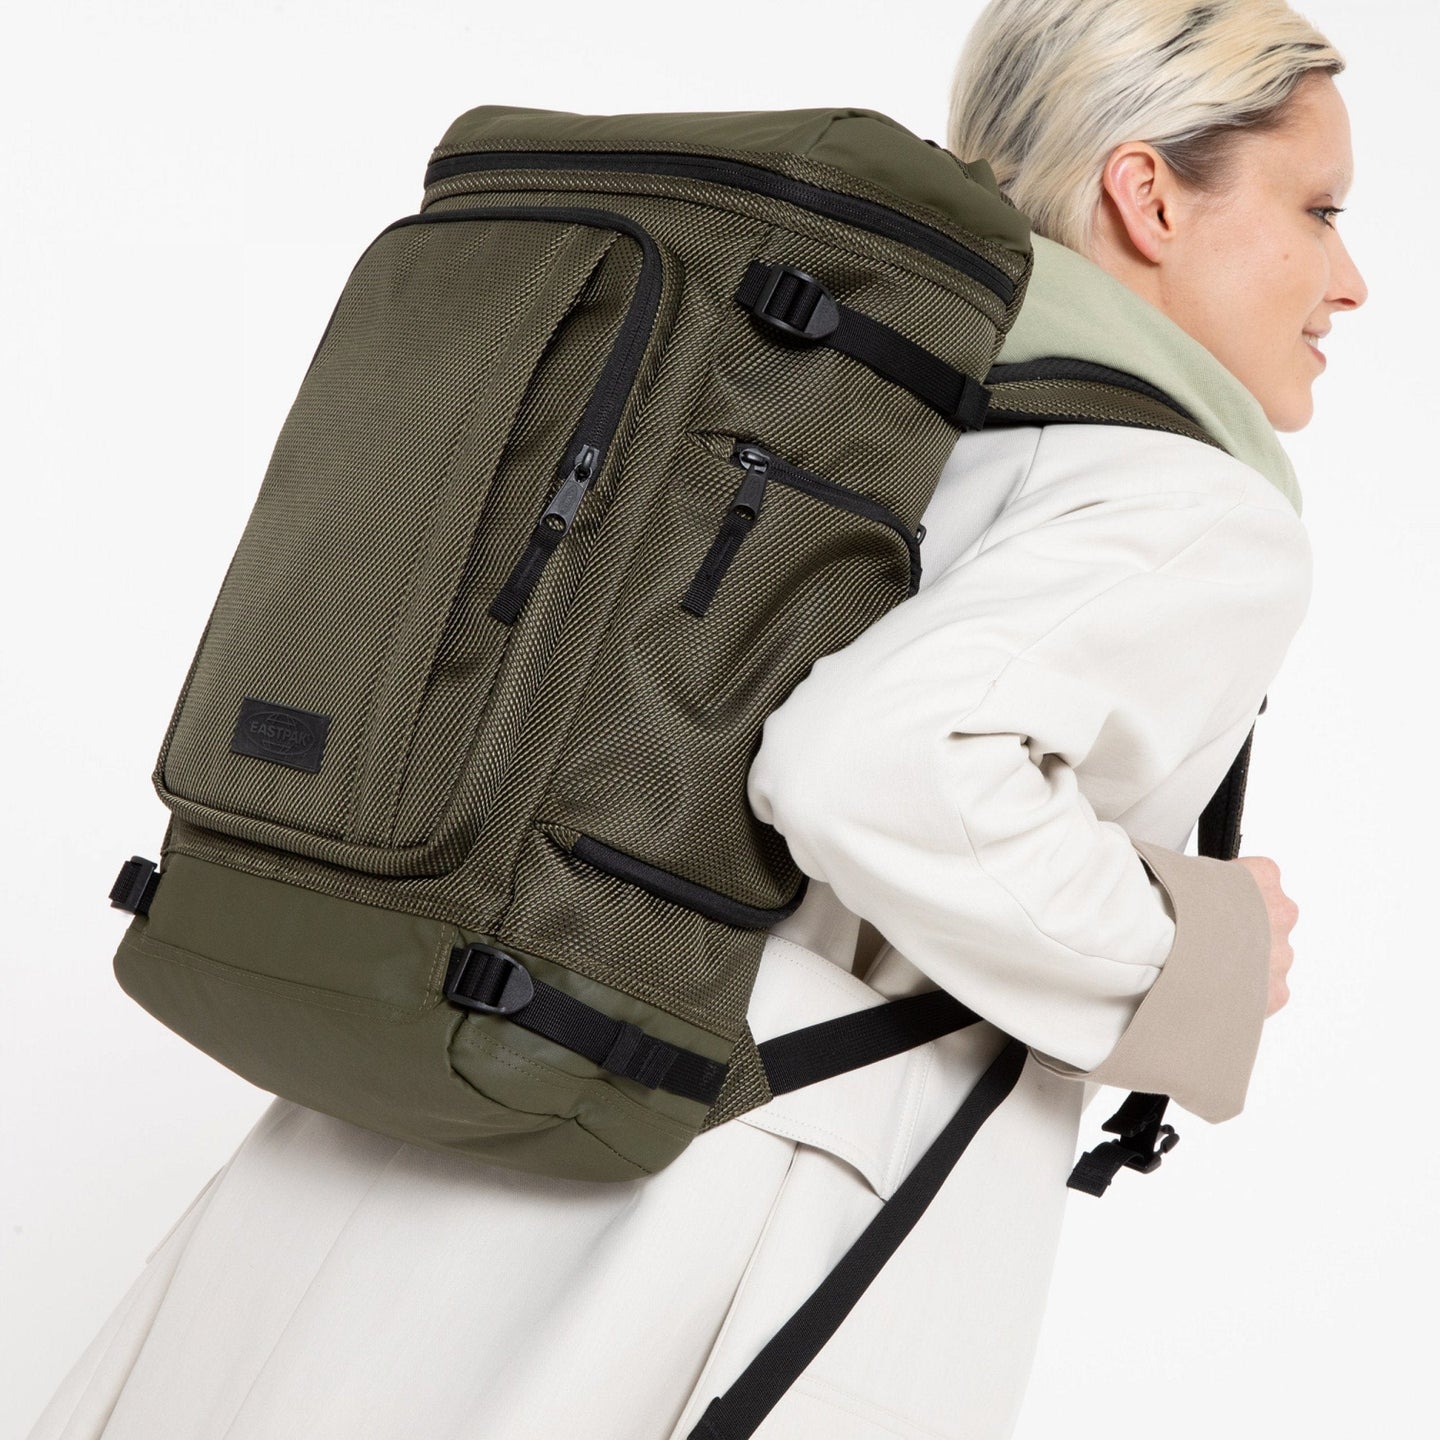 Tecum Top Cnnct Khaki Professional Backpack Side View On Model's Back